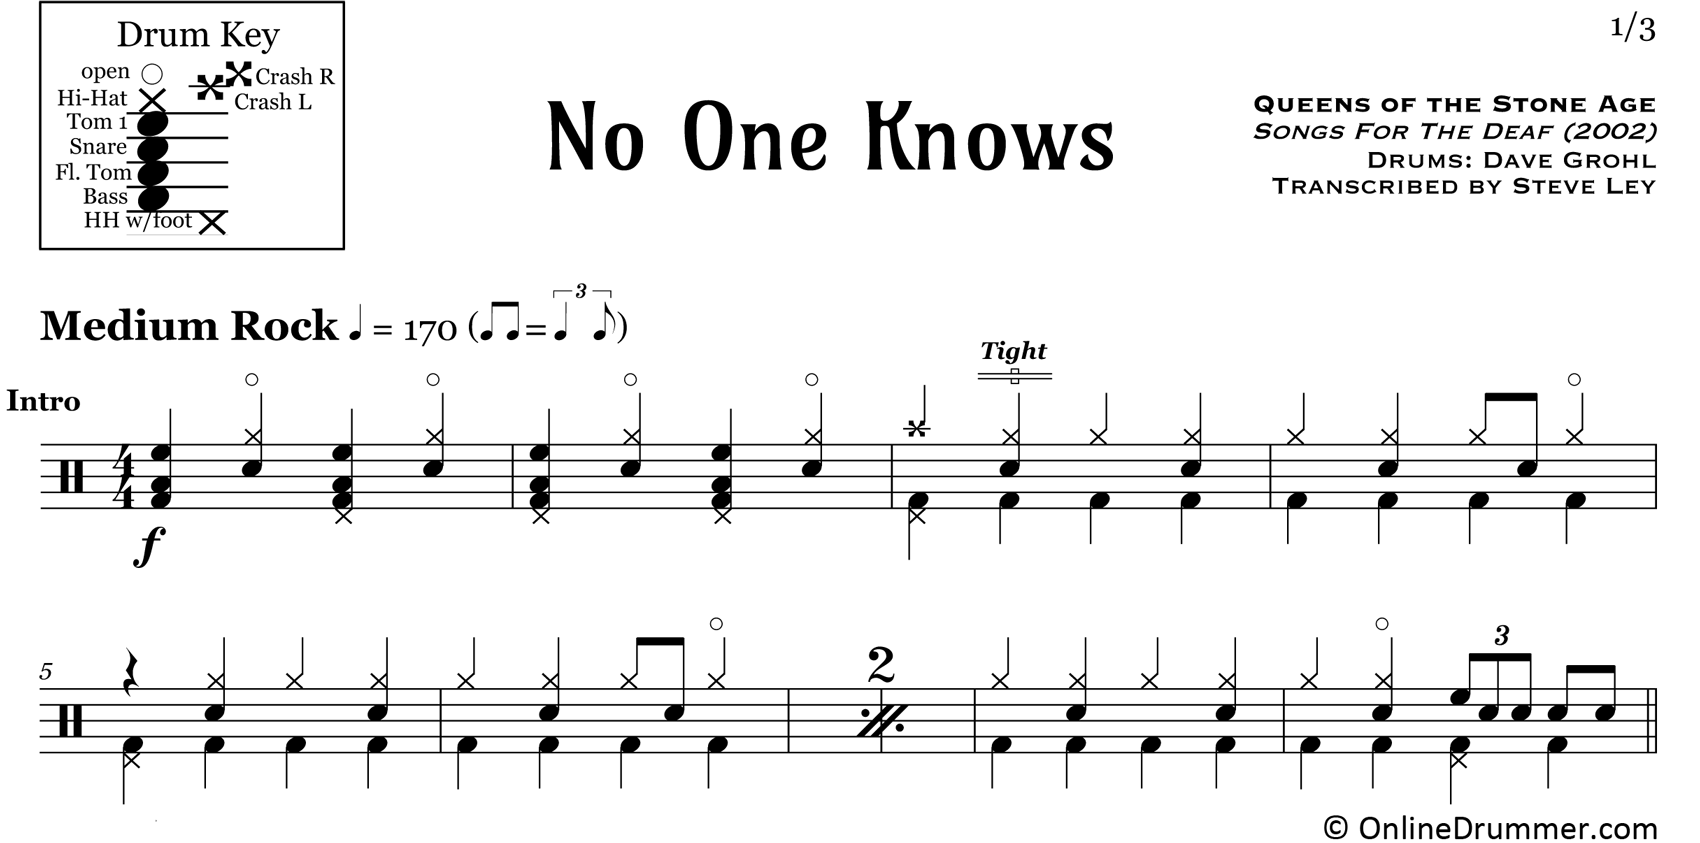 No One Knows - Queens Of The Stone Age - Drum Sheet Music